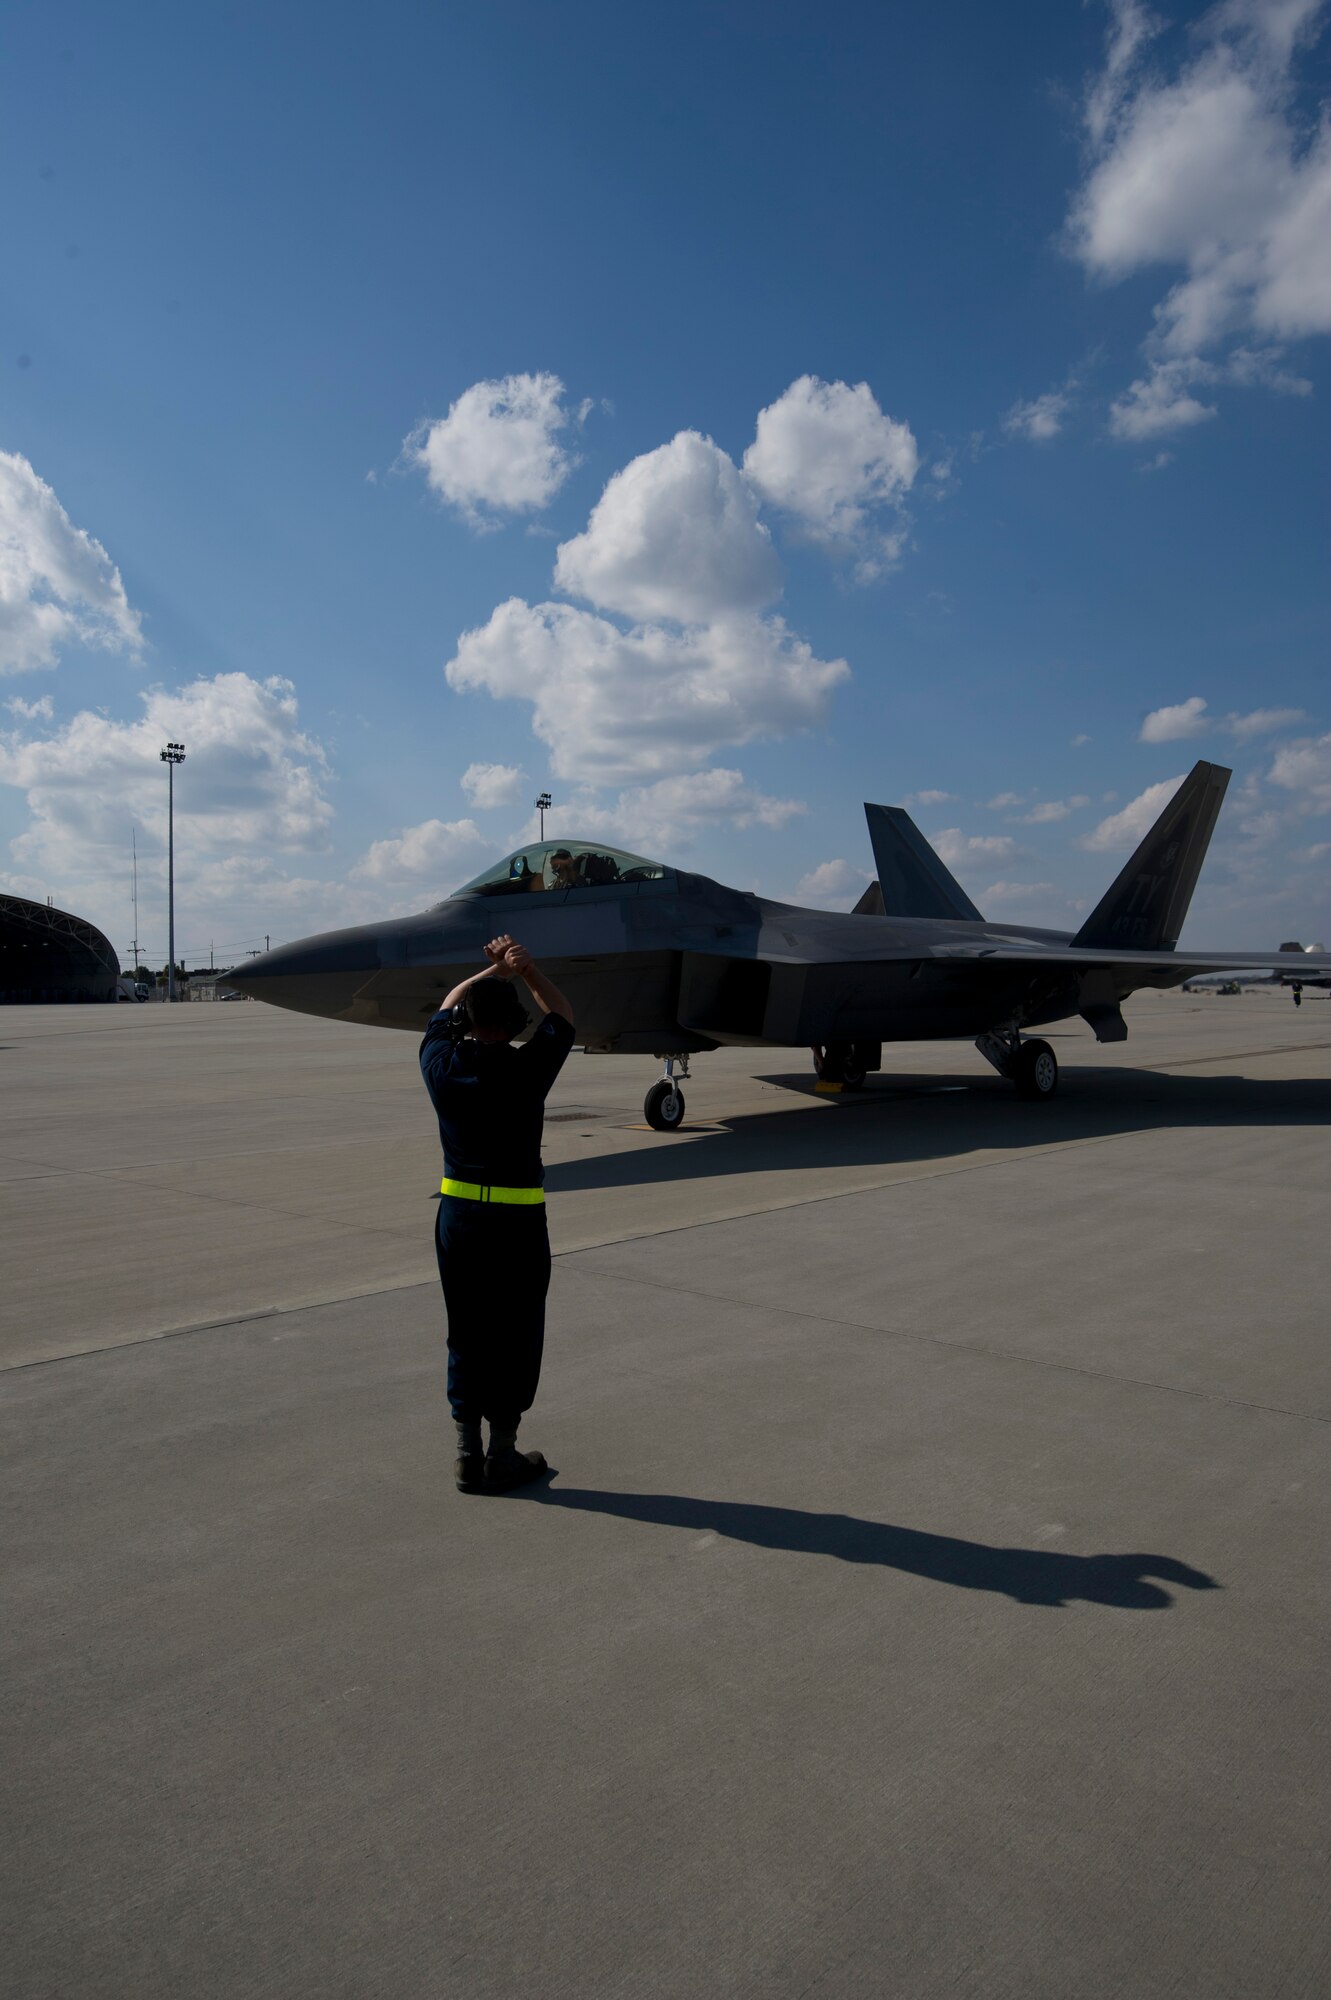 Senior Airman William Trisch, 43rd Aircraft Maintenance Unit crew chief, marshals an F-22 Raptor prior to take-off Feb. 10 at the Savannah Combat Readiness Training Center, 165th Airlift Wing, Savannah Air National Guard, Ga. Tyndall deployed more than 200 members and 14 F-22s to Savannah for Sentry Savannah 2014, a joint-force deployment exercise. (U.S. Air Force photo by Senior Airman Christopher Reel)